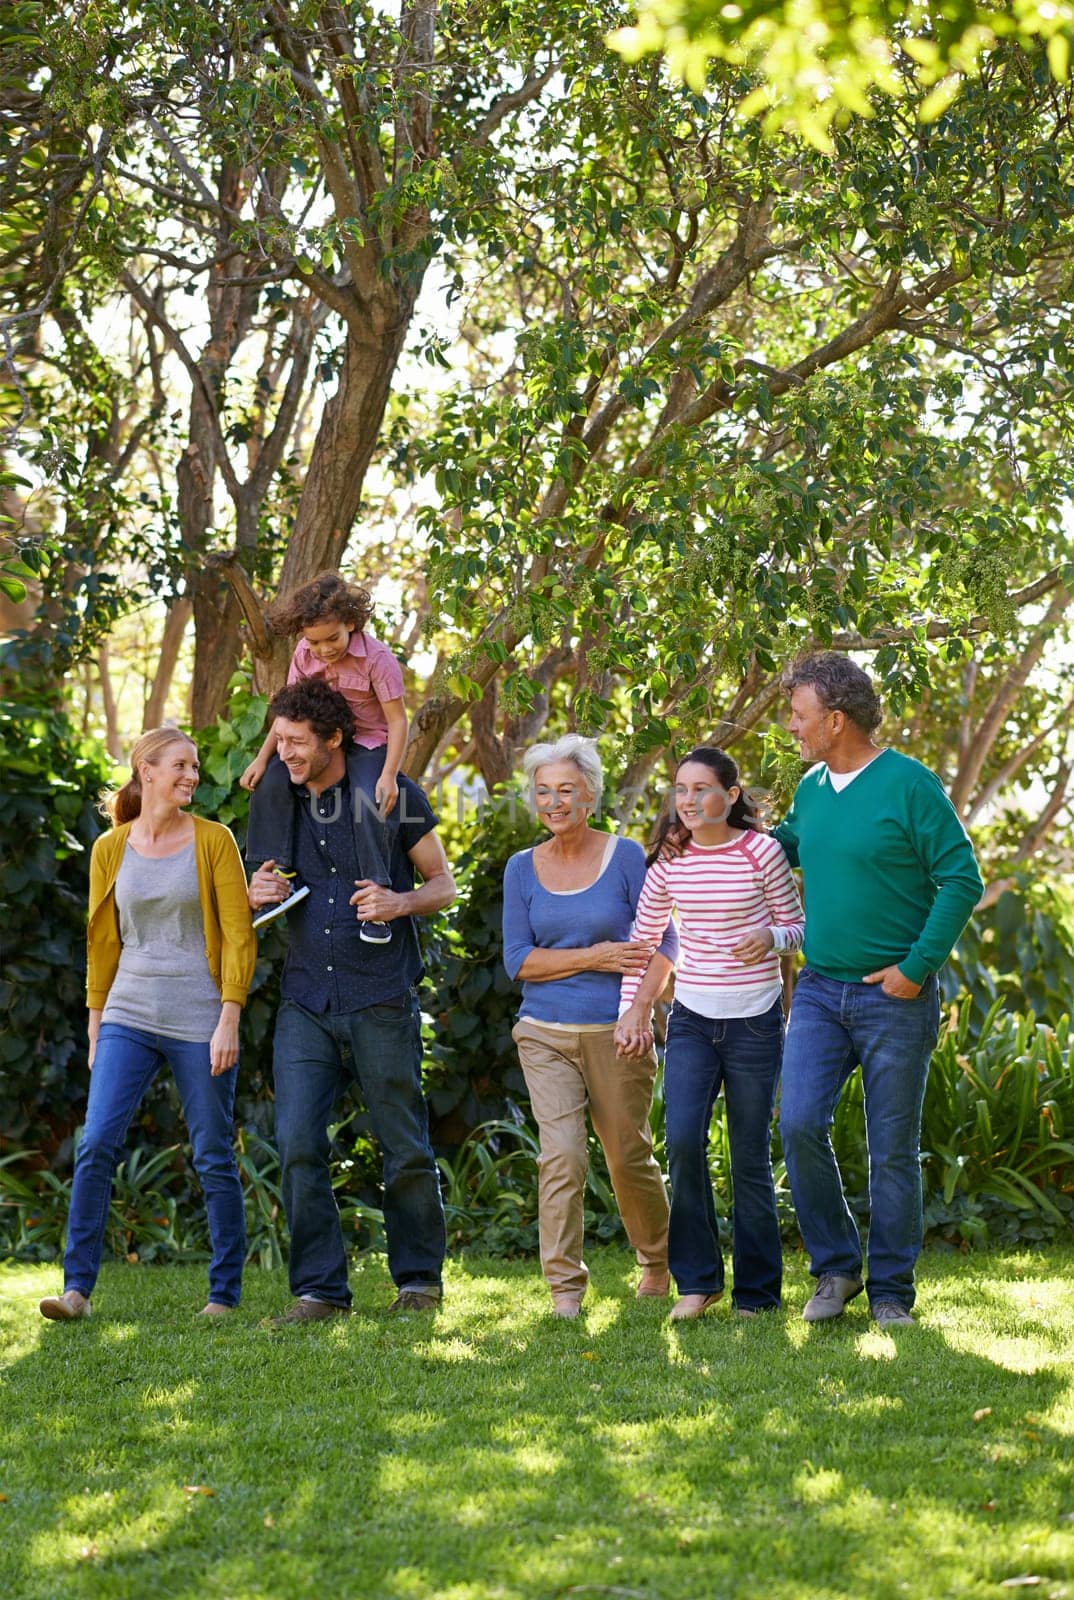 Happy family, conversation and together in outdoor nature, love and bonding or relax in backyard. Generations, smile and peace or communication for support in garden or park, vacation and holiday.